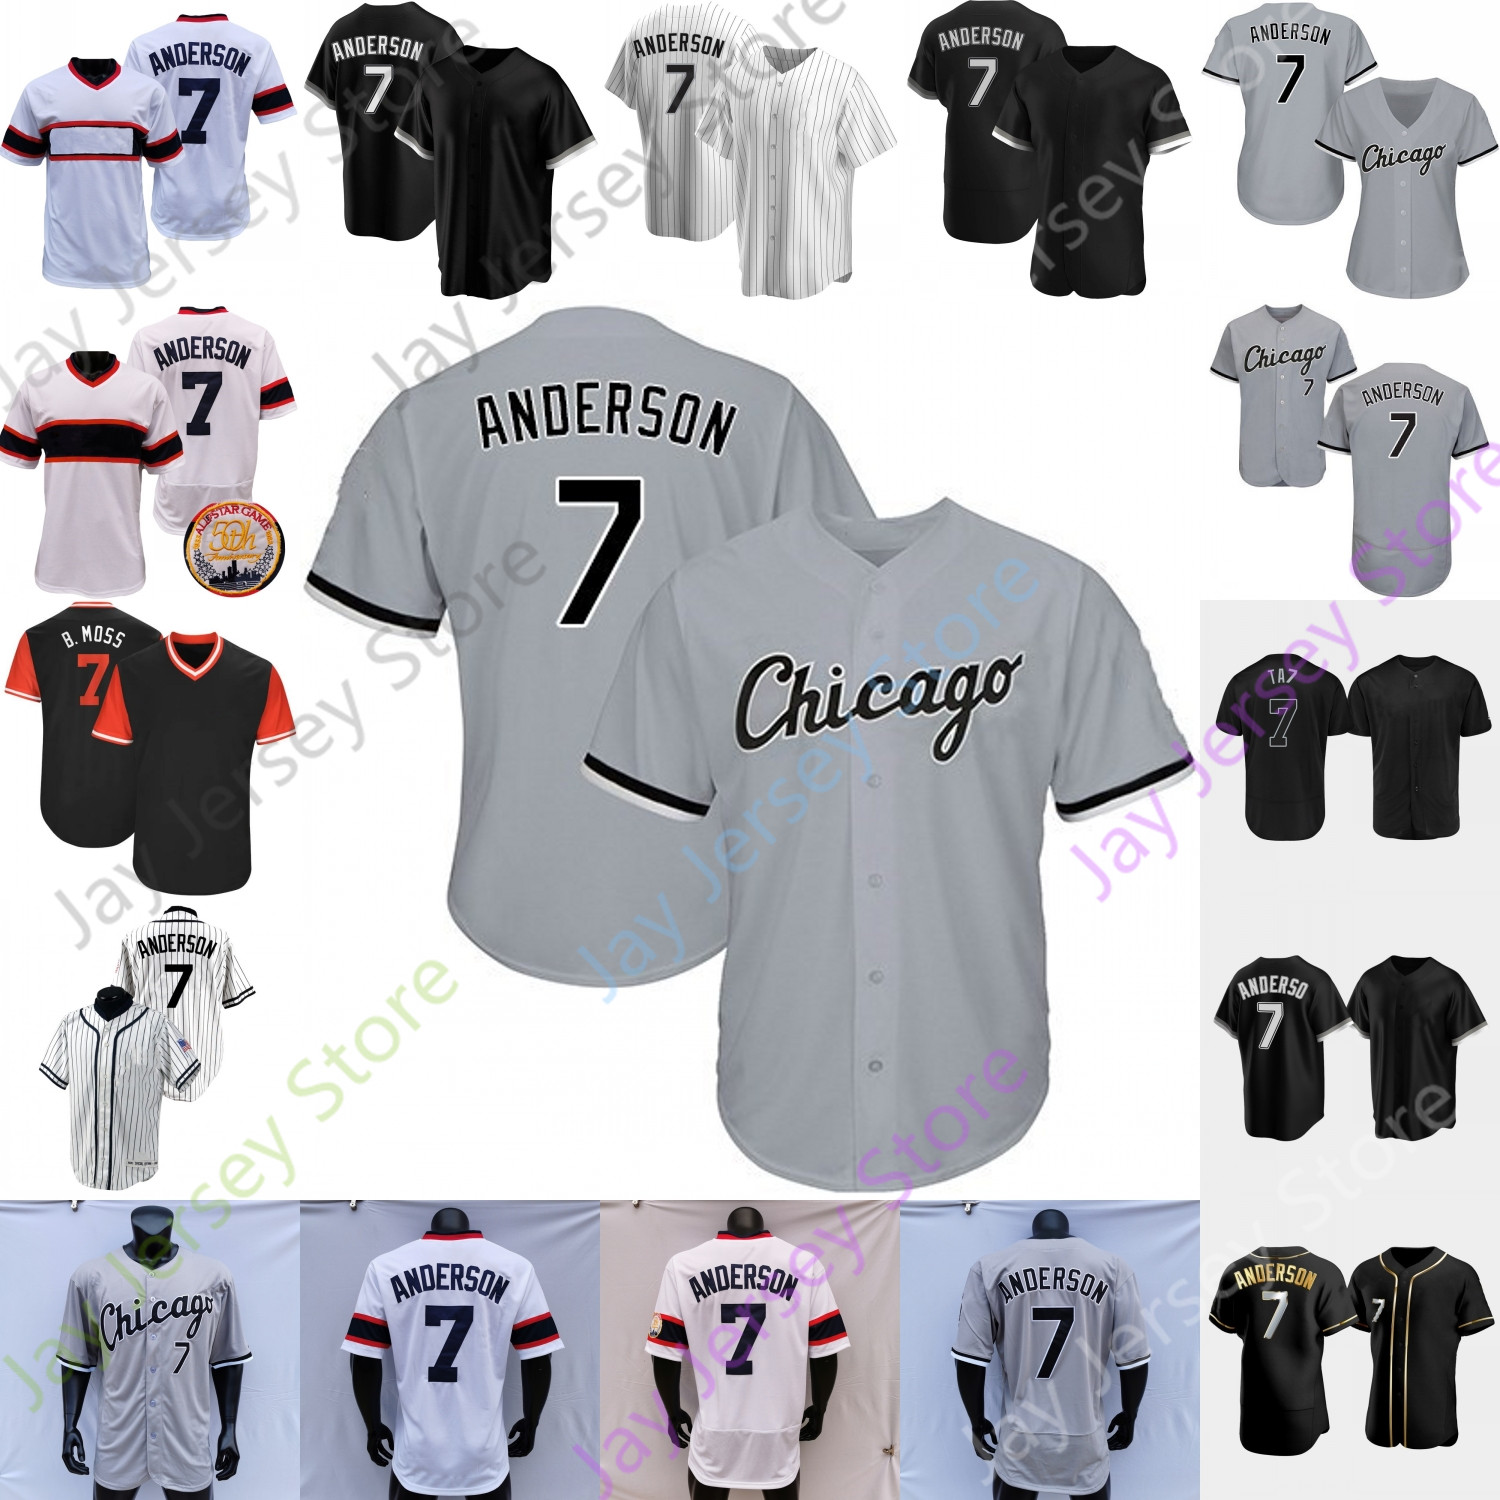 

Tim Anderson Jersey 1990 Turn Back Black Grey White Player Fans Vintage Salute to Service Pullover Pinstripe Size S-3XL, Black player